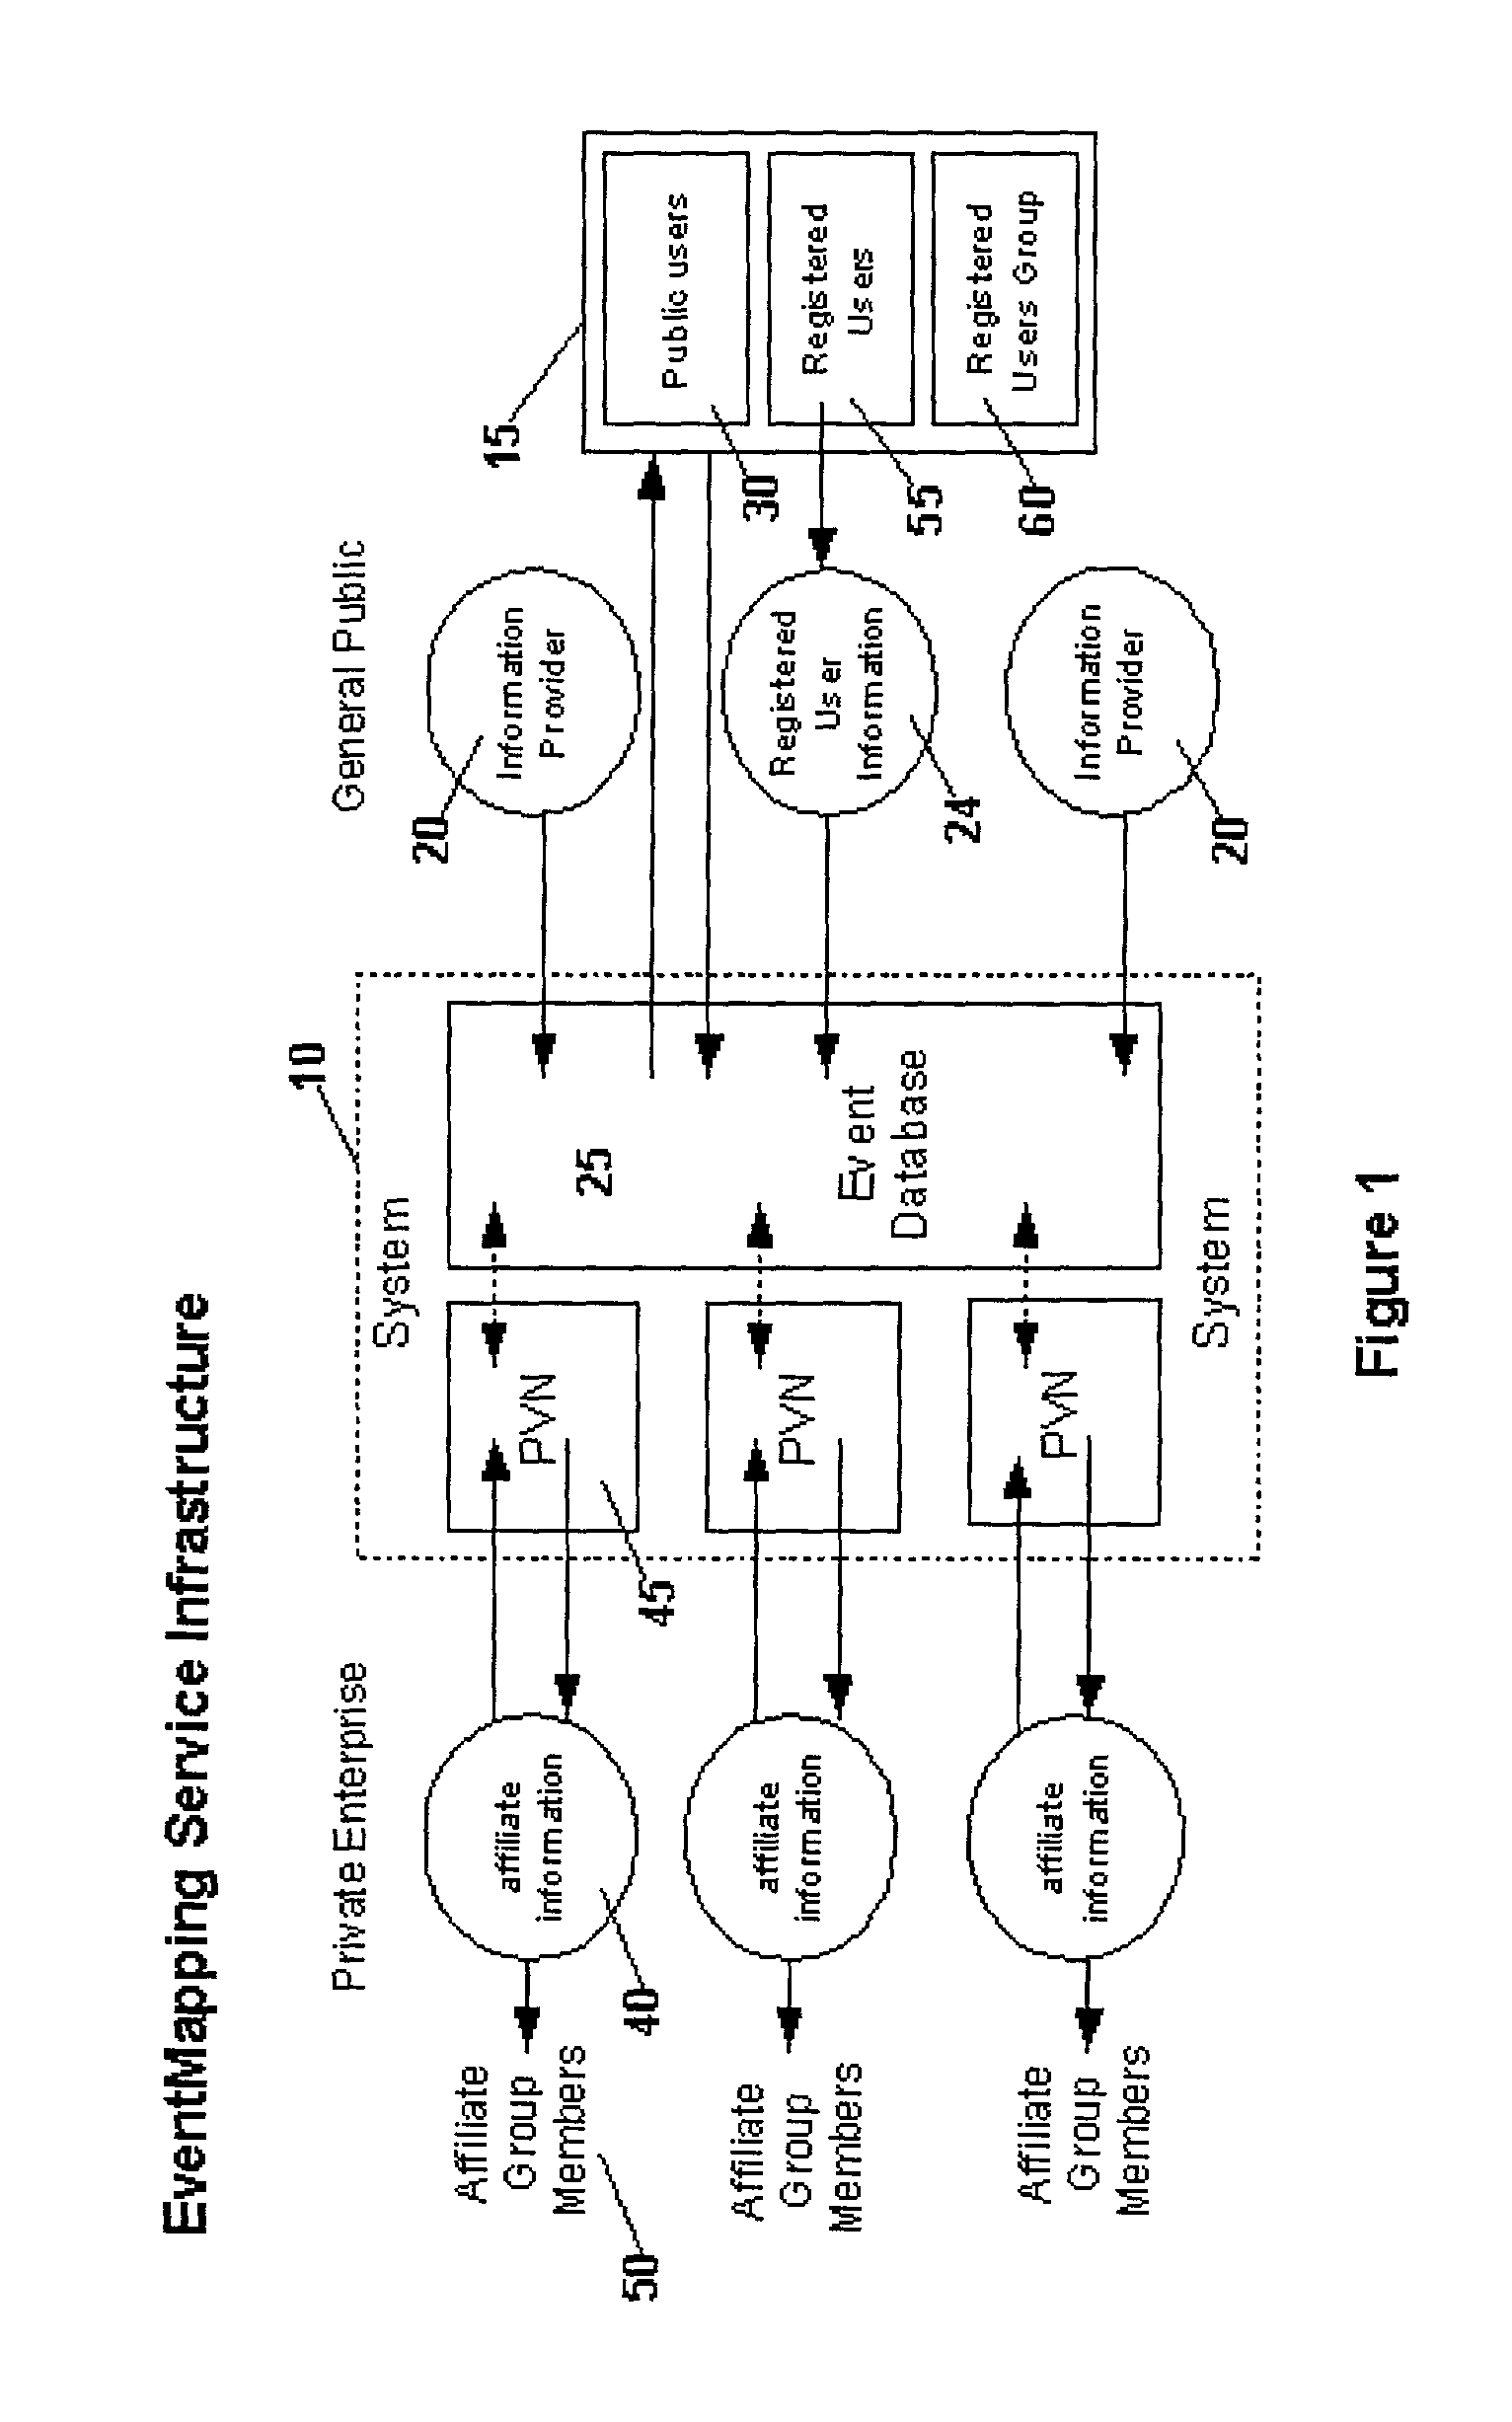 Method of organizing information into topical, temporal, and location associations for organizing, selecting, and distributing information